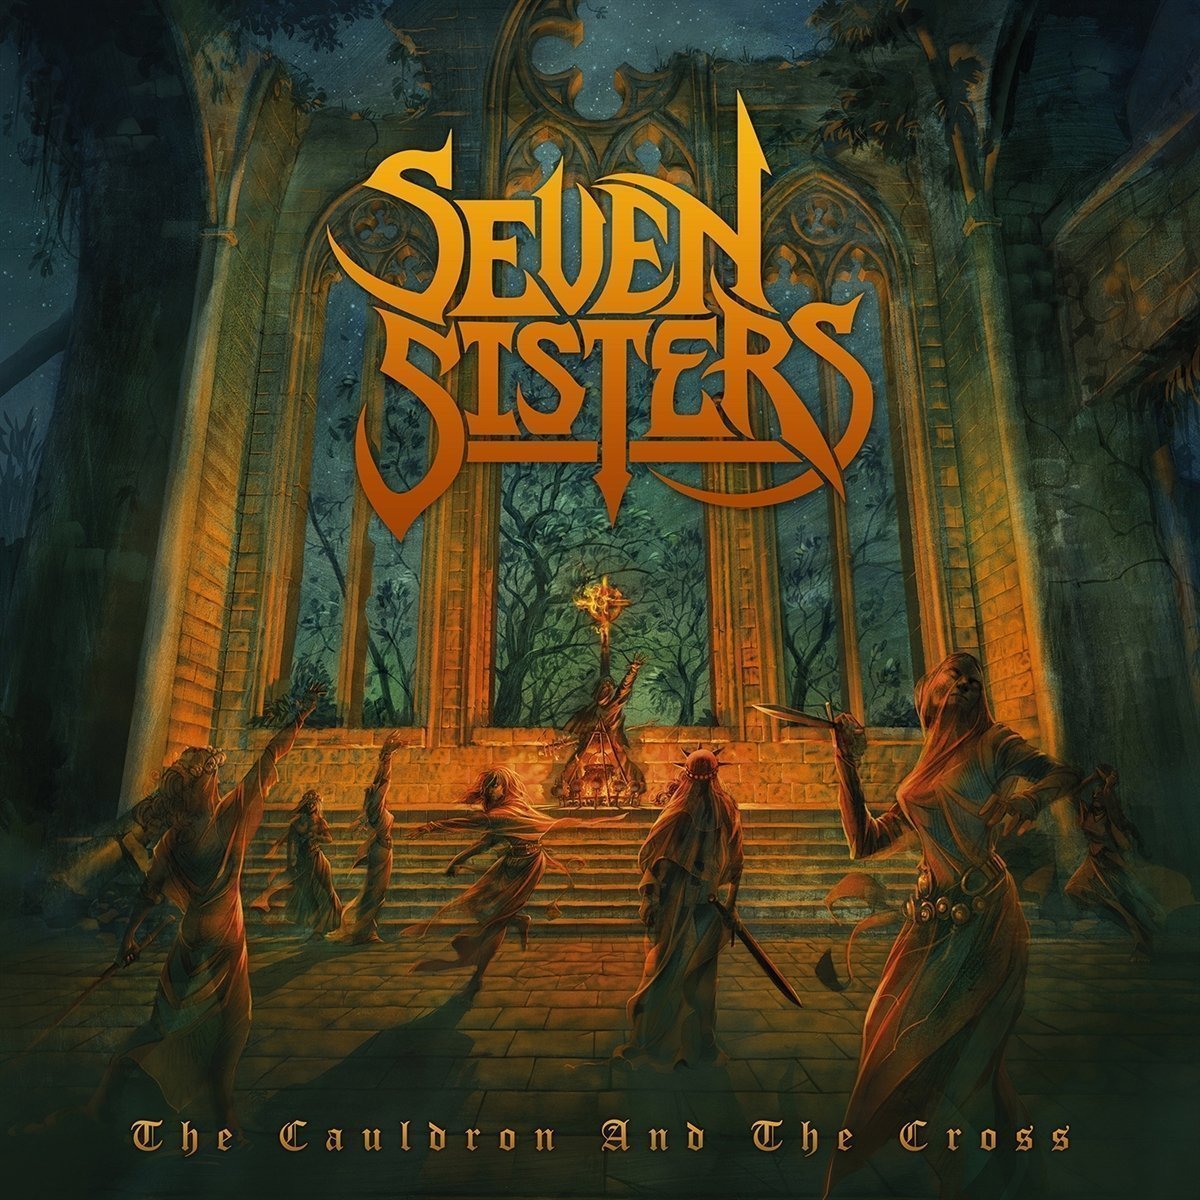 Vinyl Record Seven Sisters - The Cauldron And The Cross (2 LP)